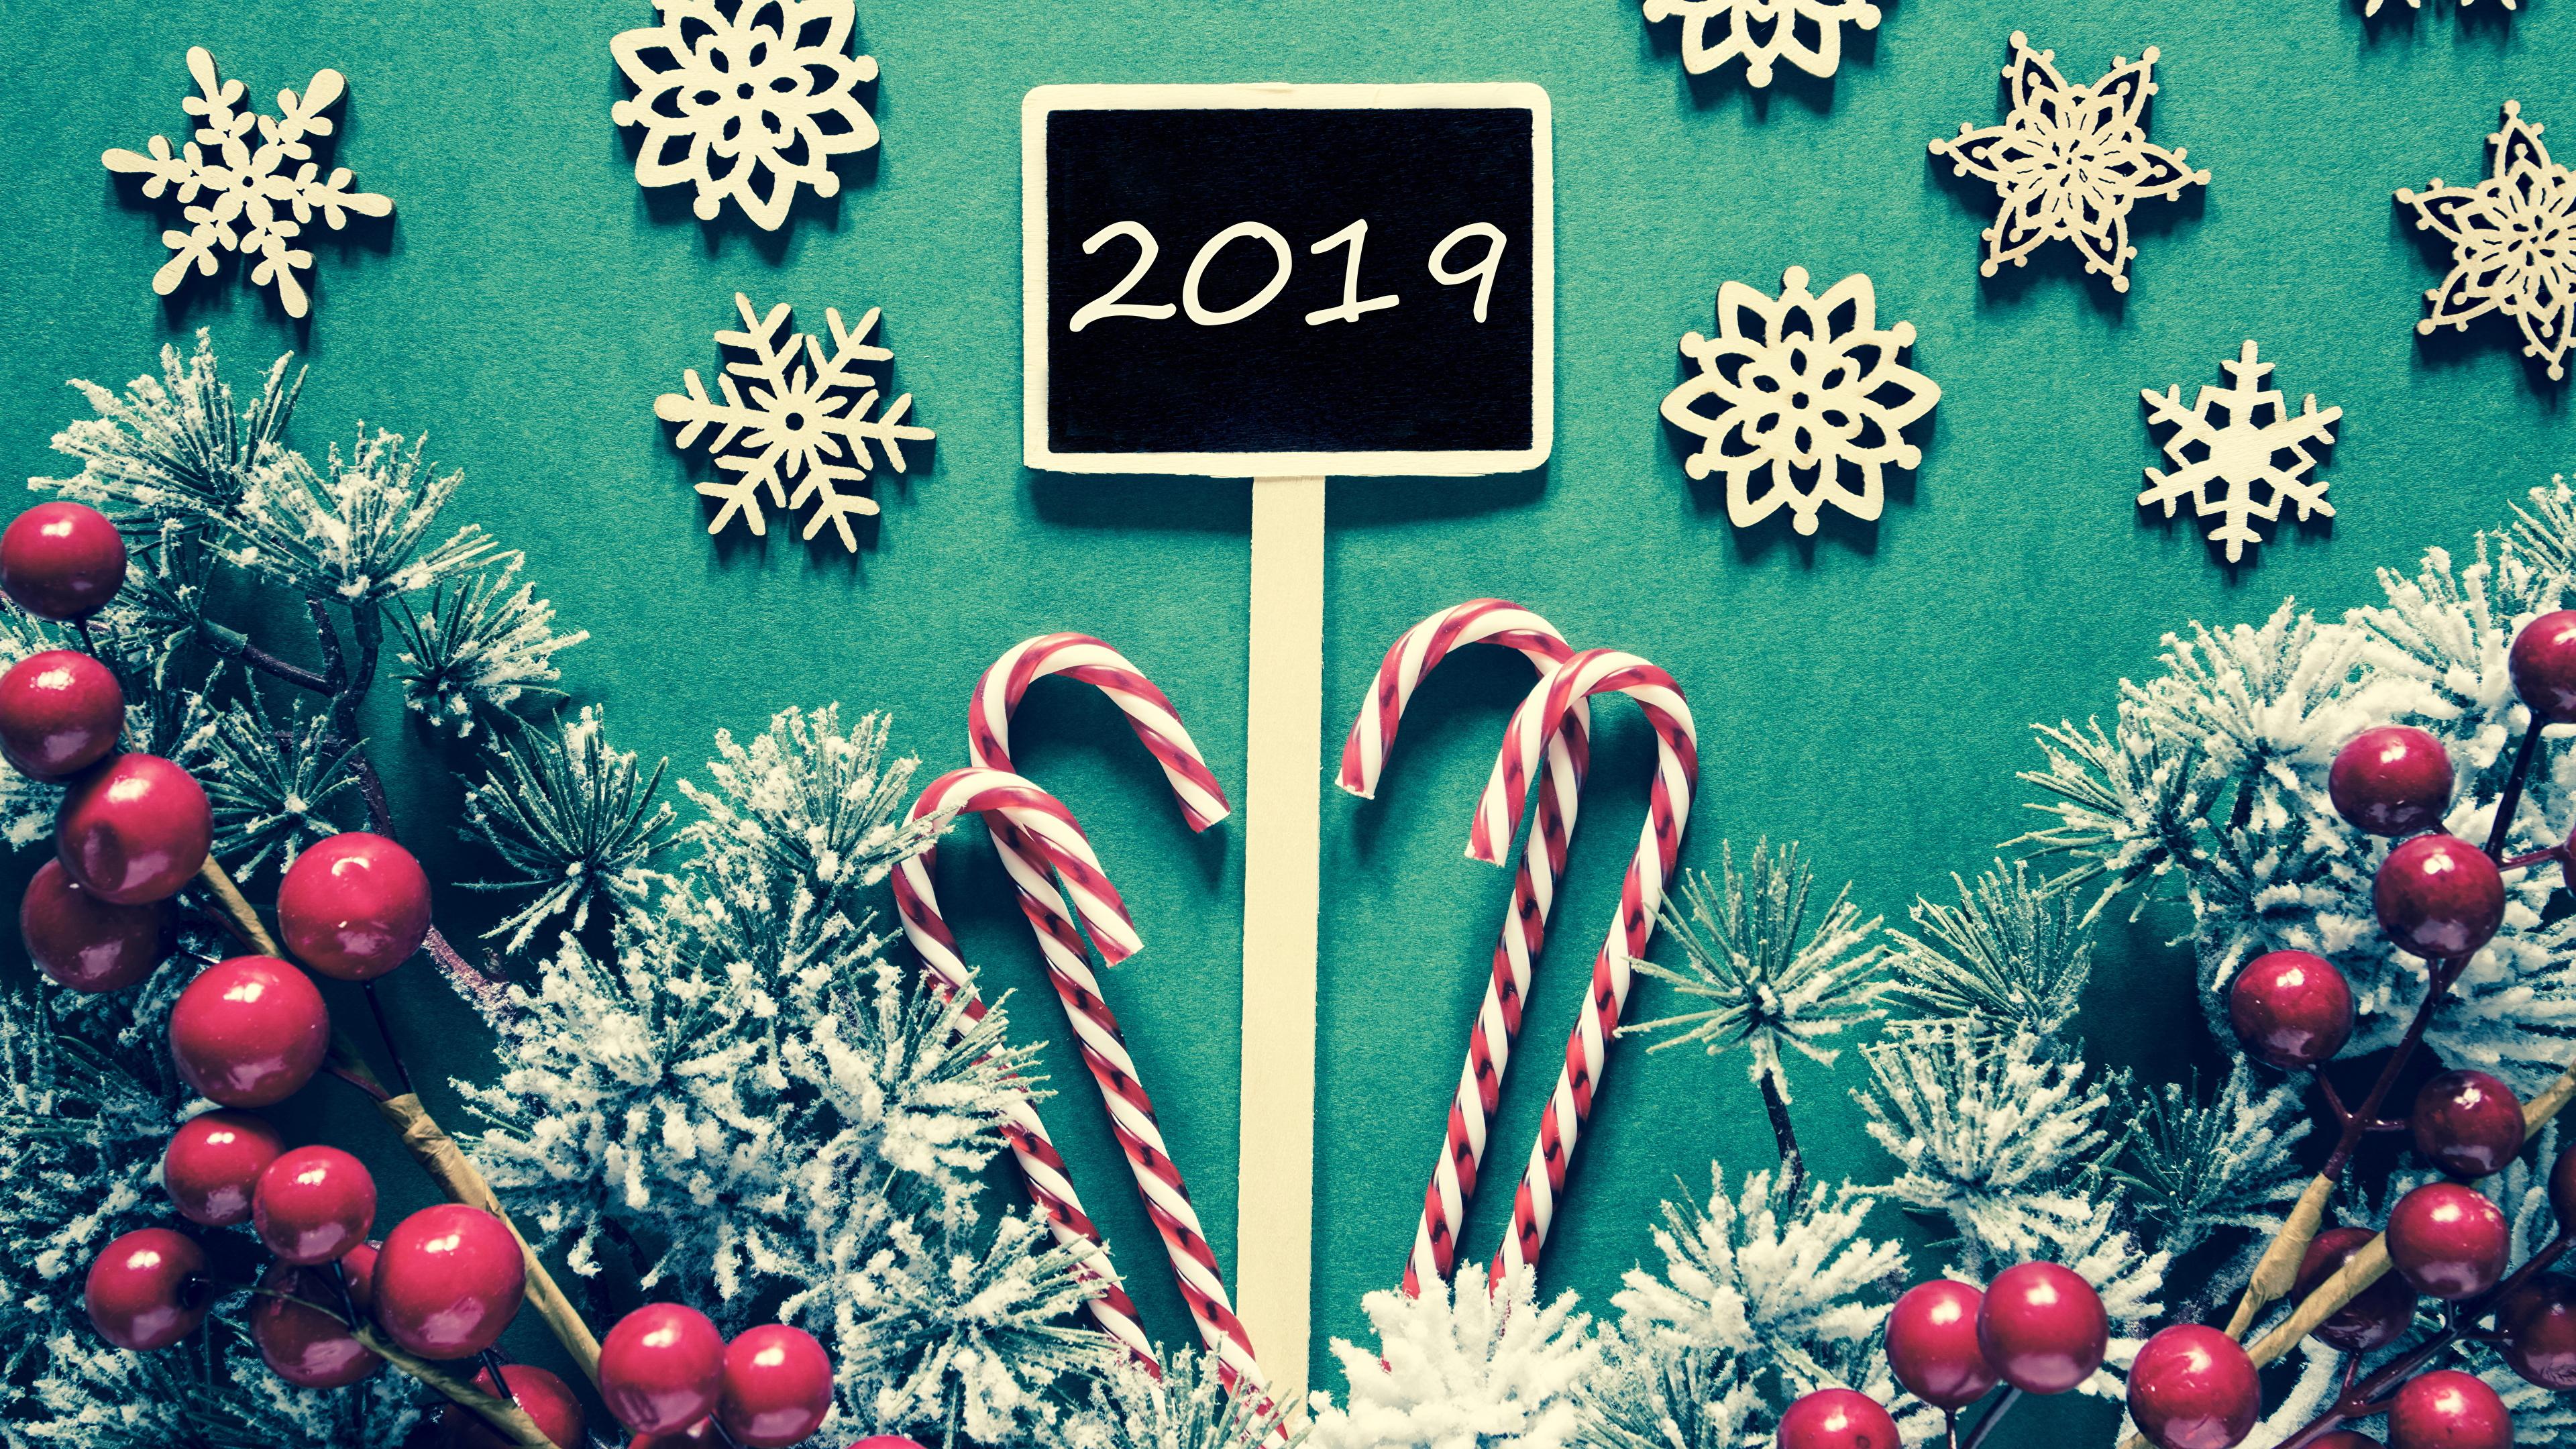 Picture 2019 New year Lollipop Snowflakes Berry Branches